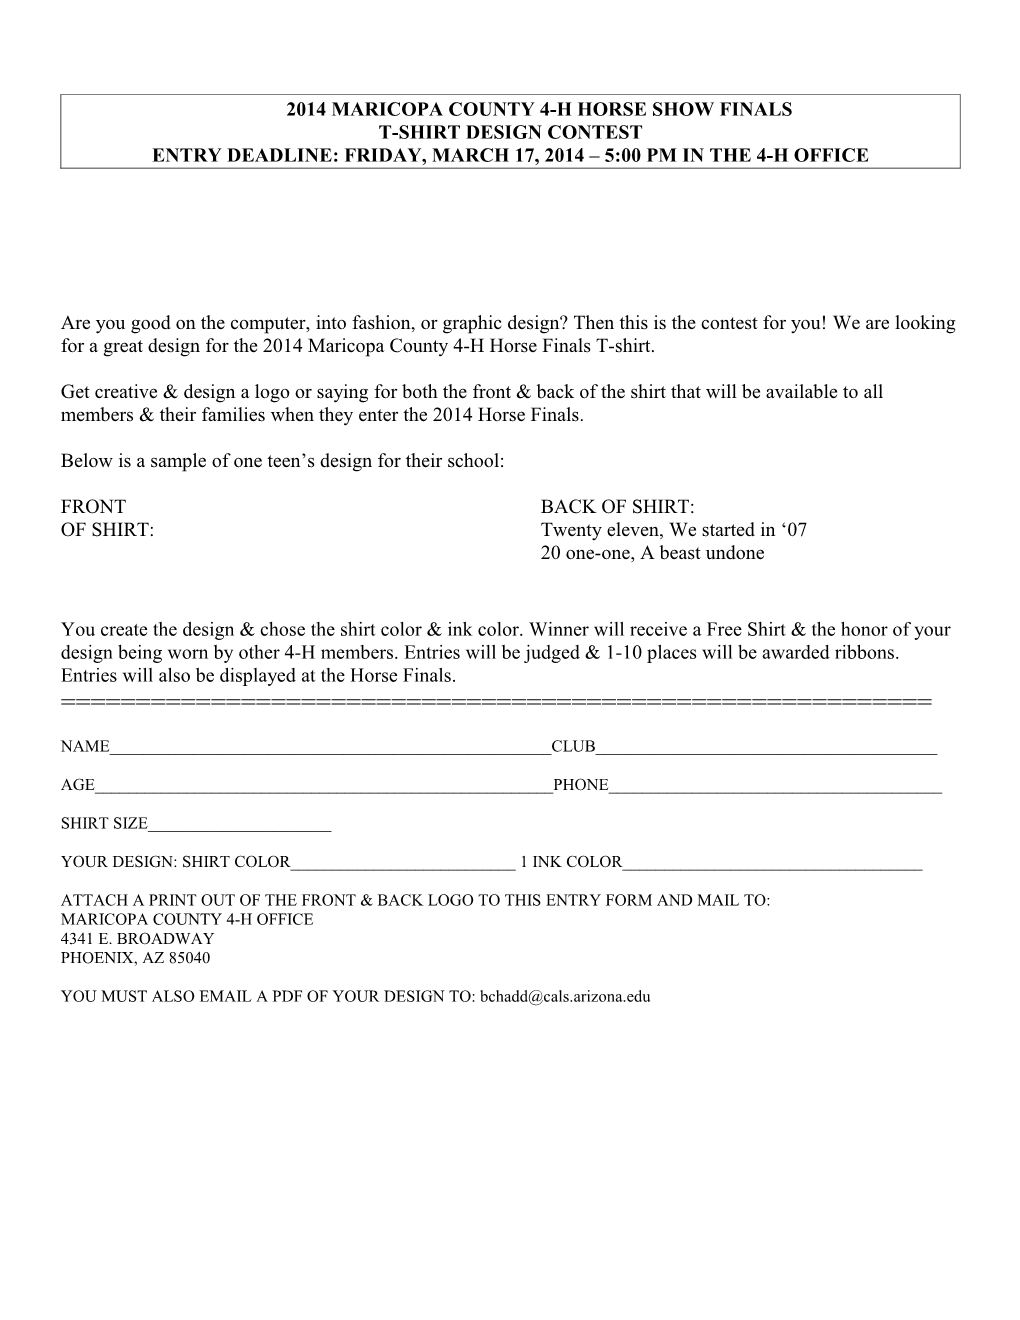 2014 Maricopa County 4-H Horse Show Finals Entry Form